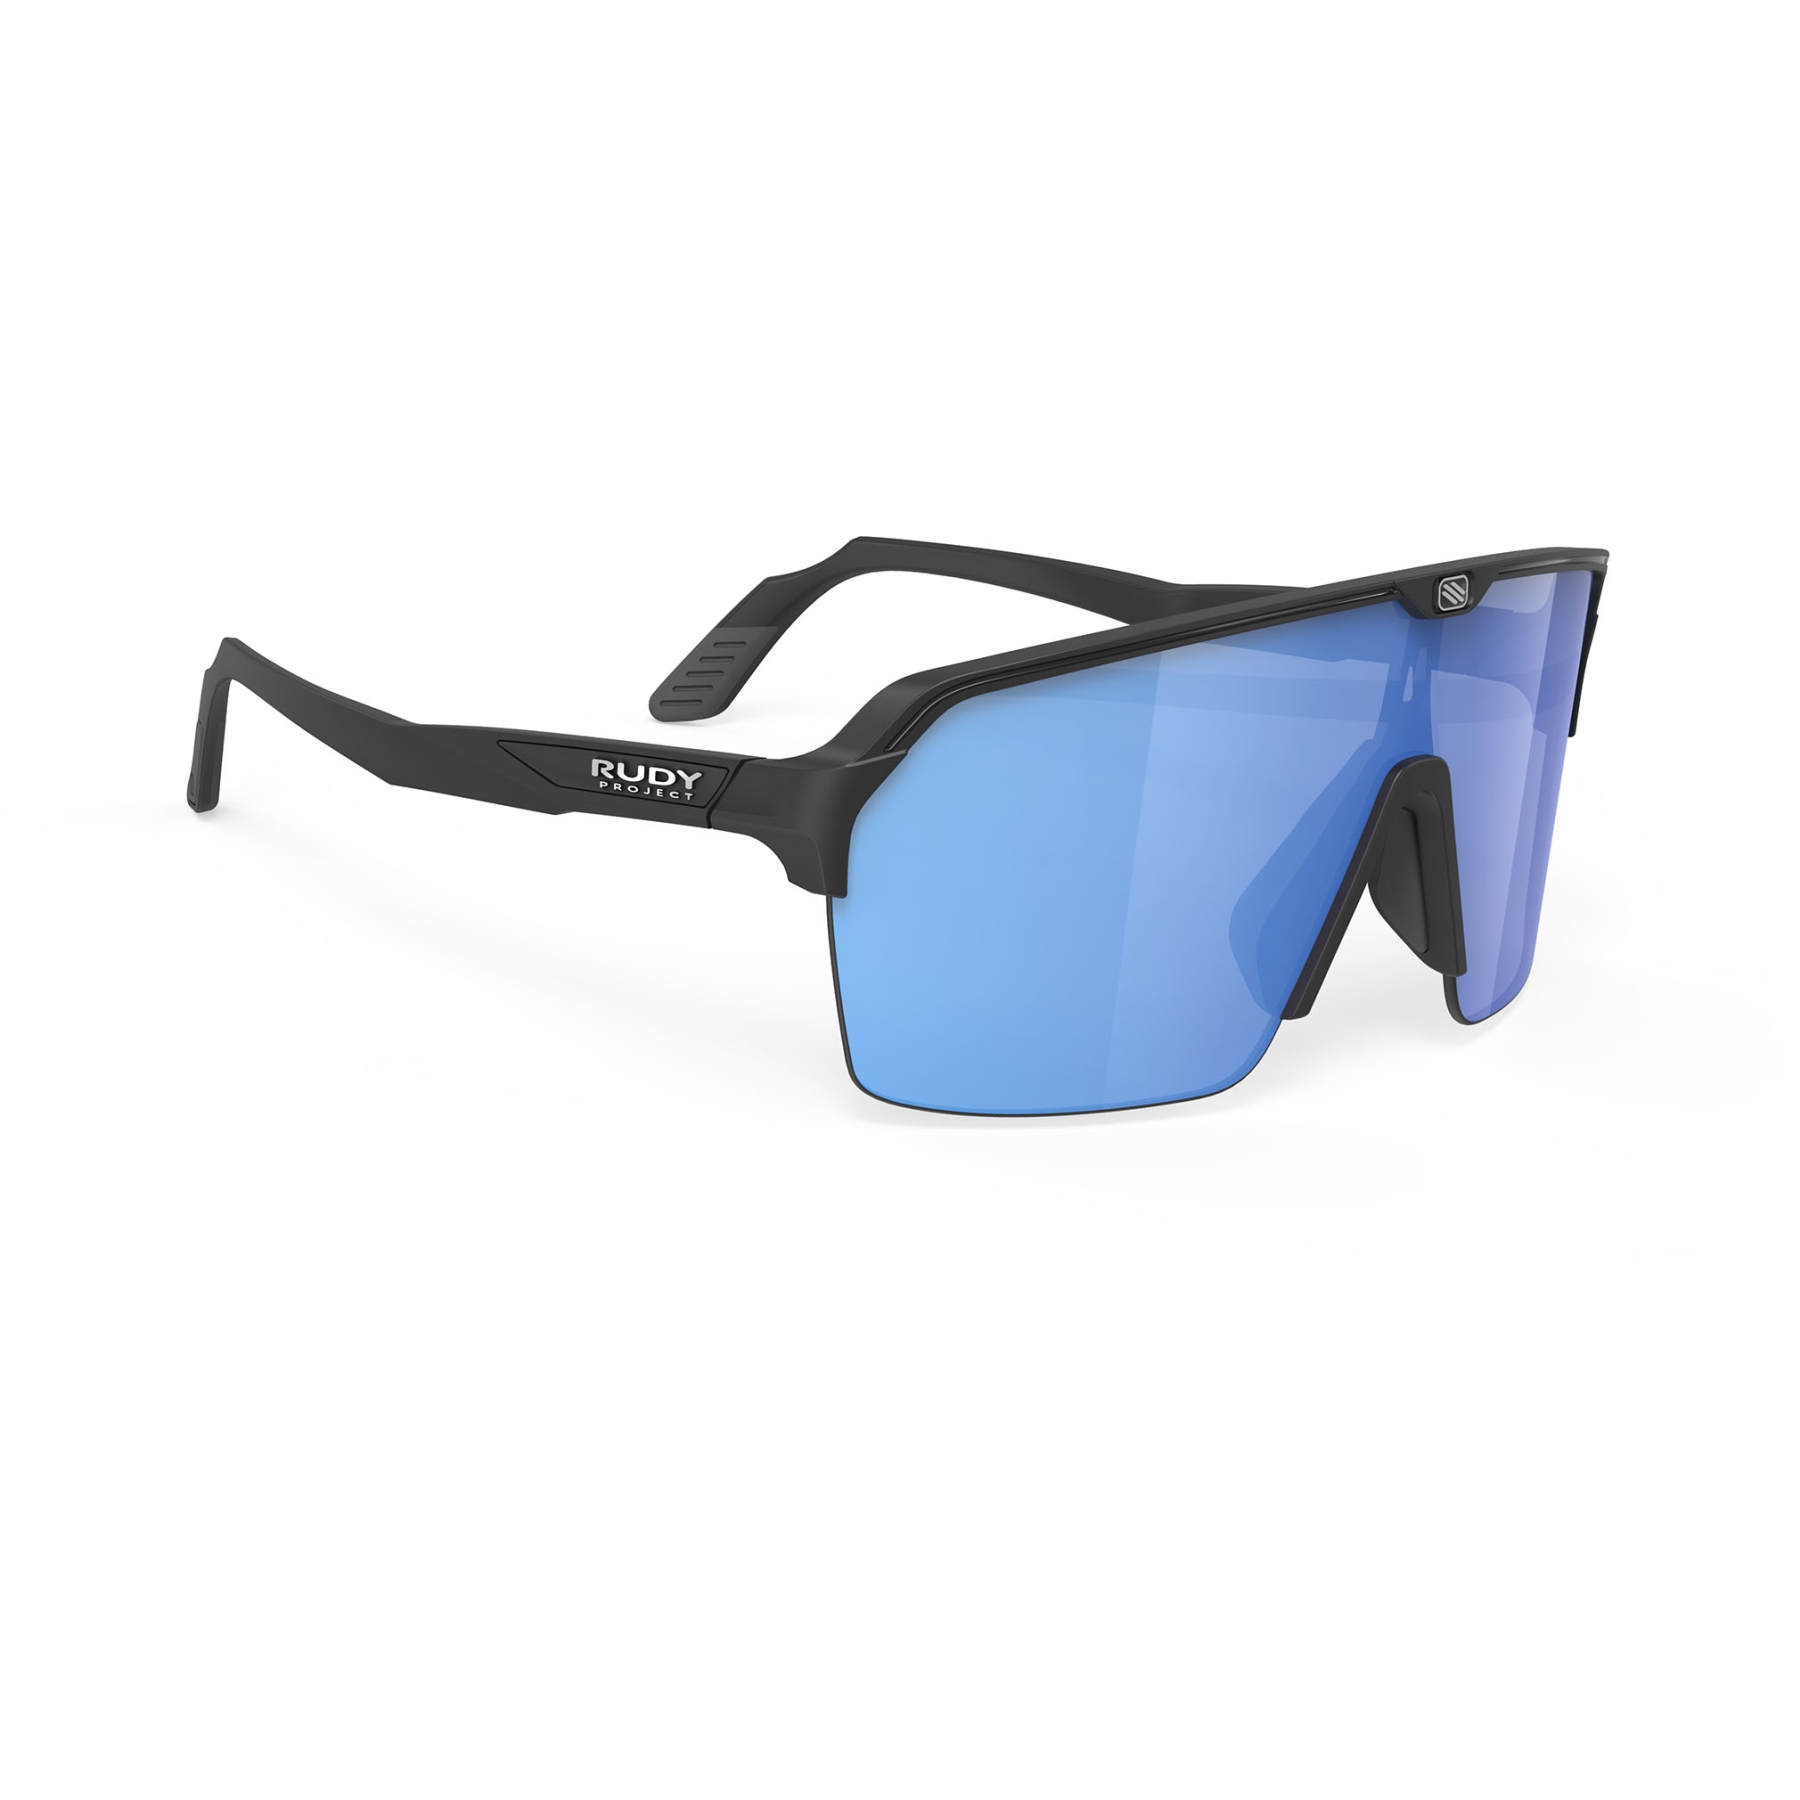 Picture of Rudy Project Spinshield Air Glasses - Black (Matte)/Multilaser Blue